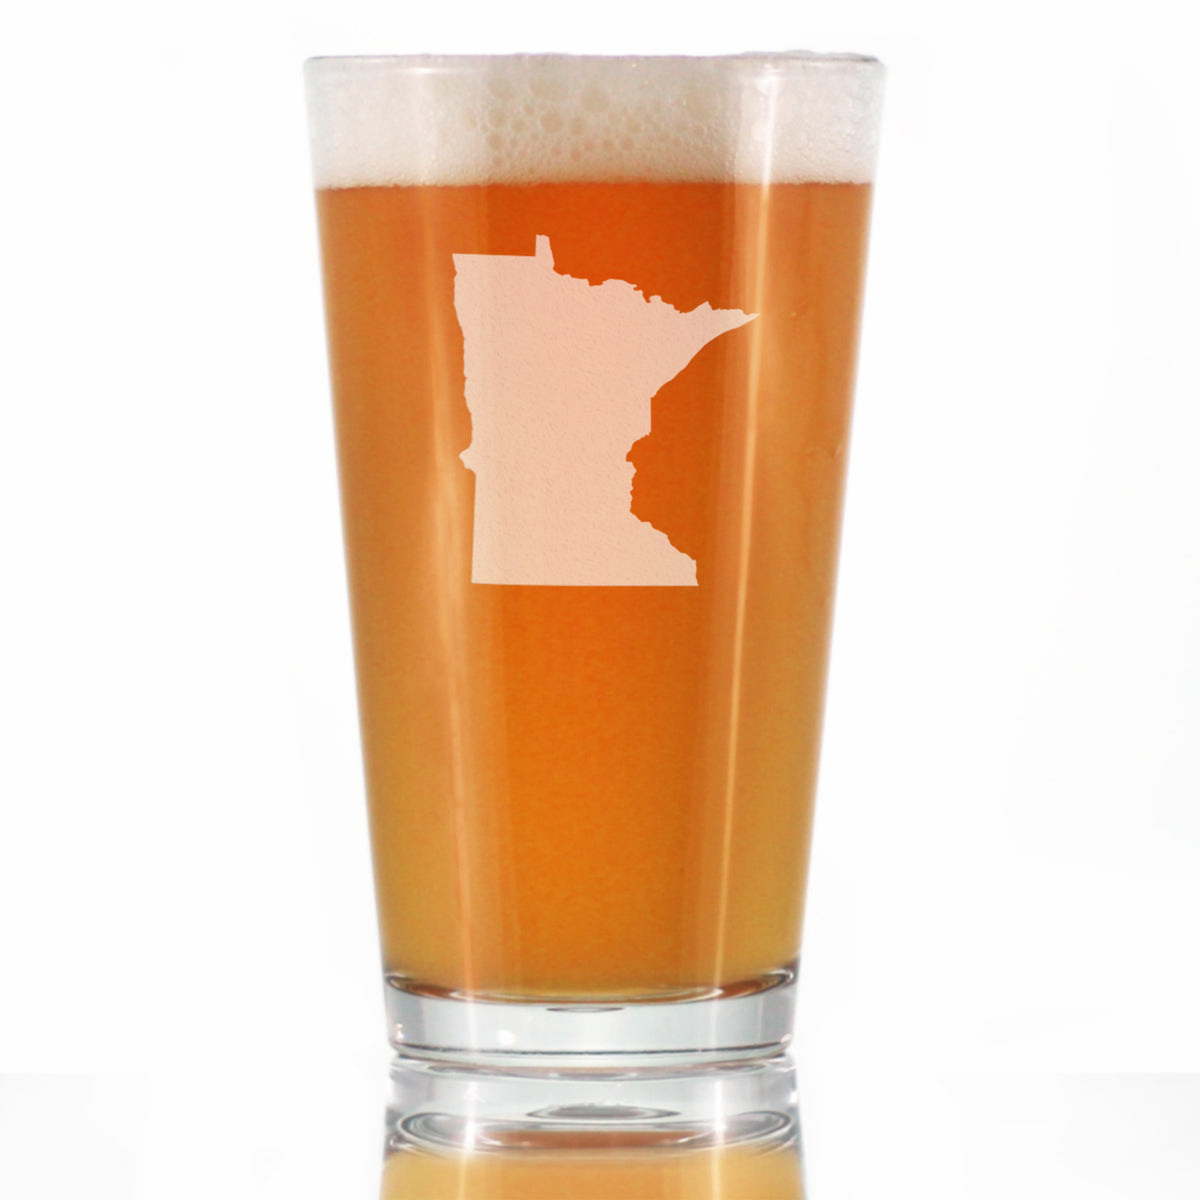 Minnesota State Outline Pint Glass for Beer - State Themed Drinking Decor and Gifts for Minnesotan Women &amp; Men - 16 Oz Glasses